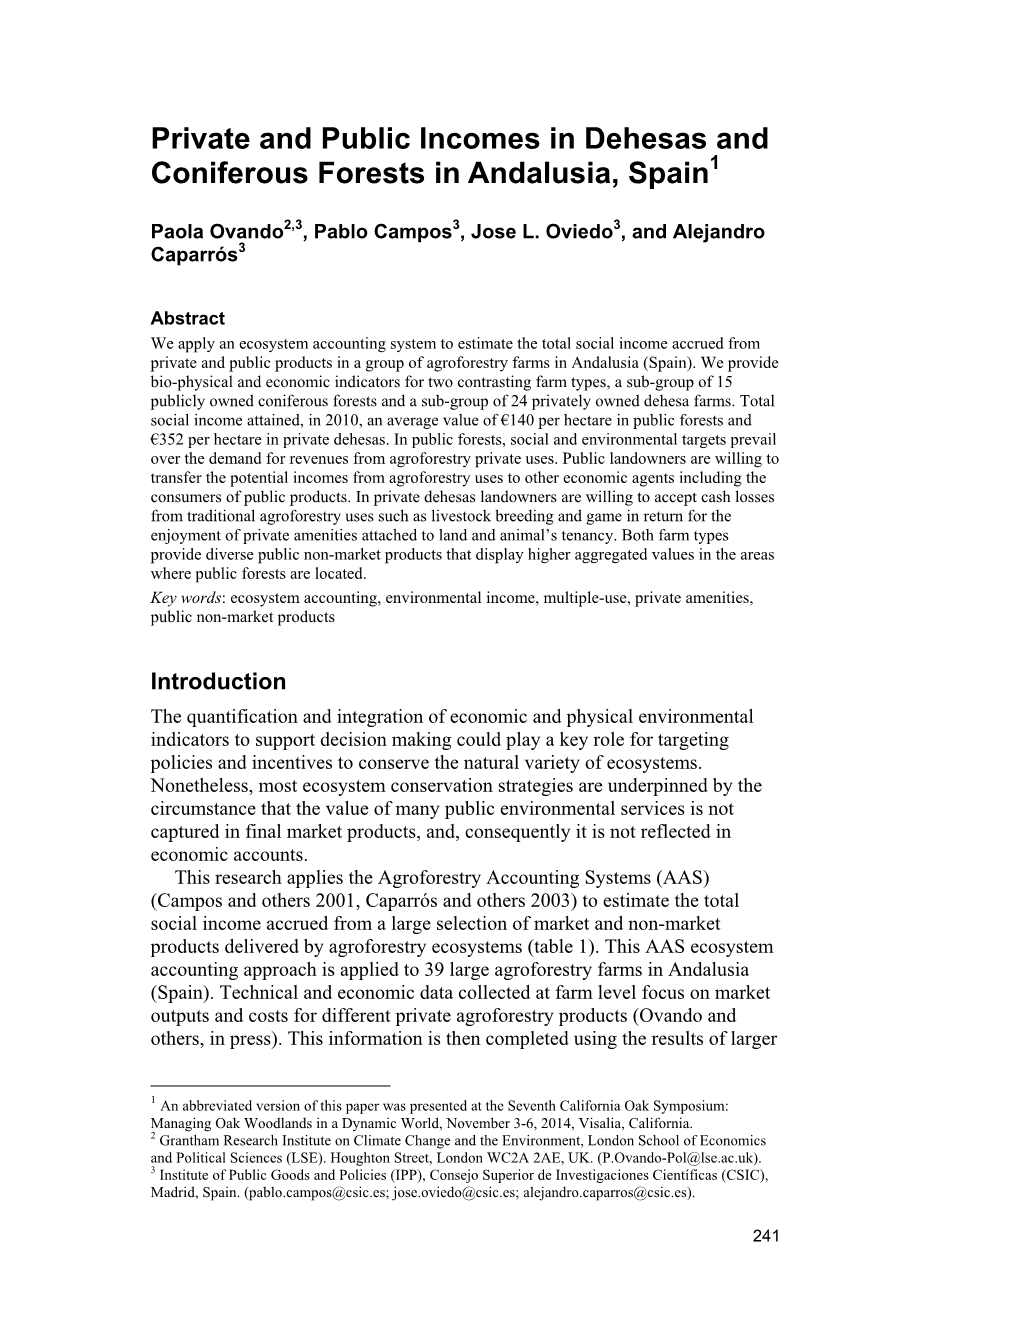 Private and Public Incomes in Dehesas and Coniferous Forests in Andalusia, Spain1